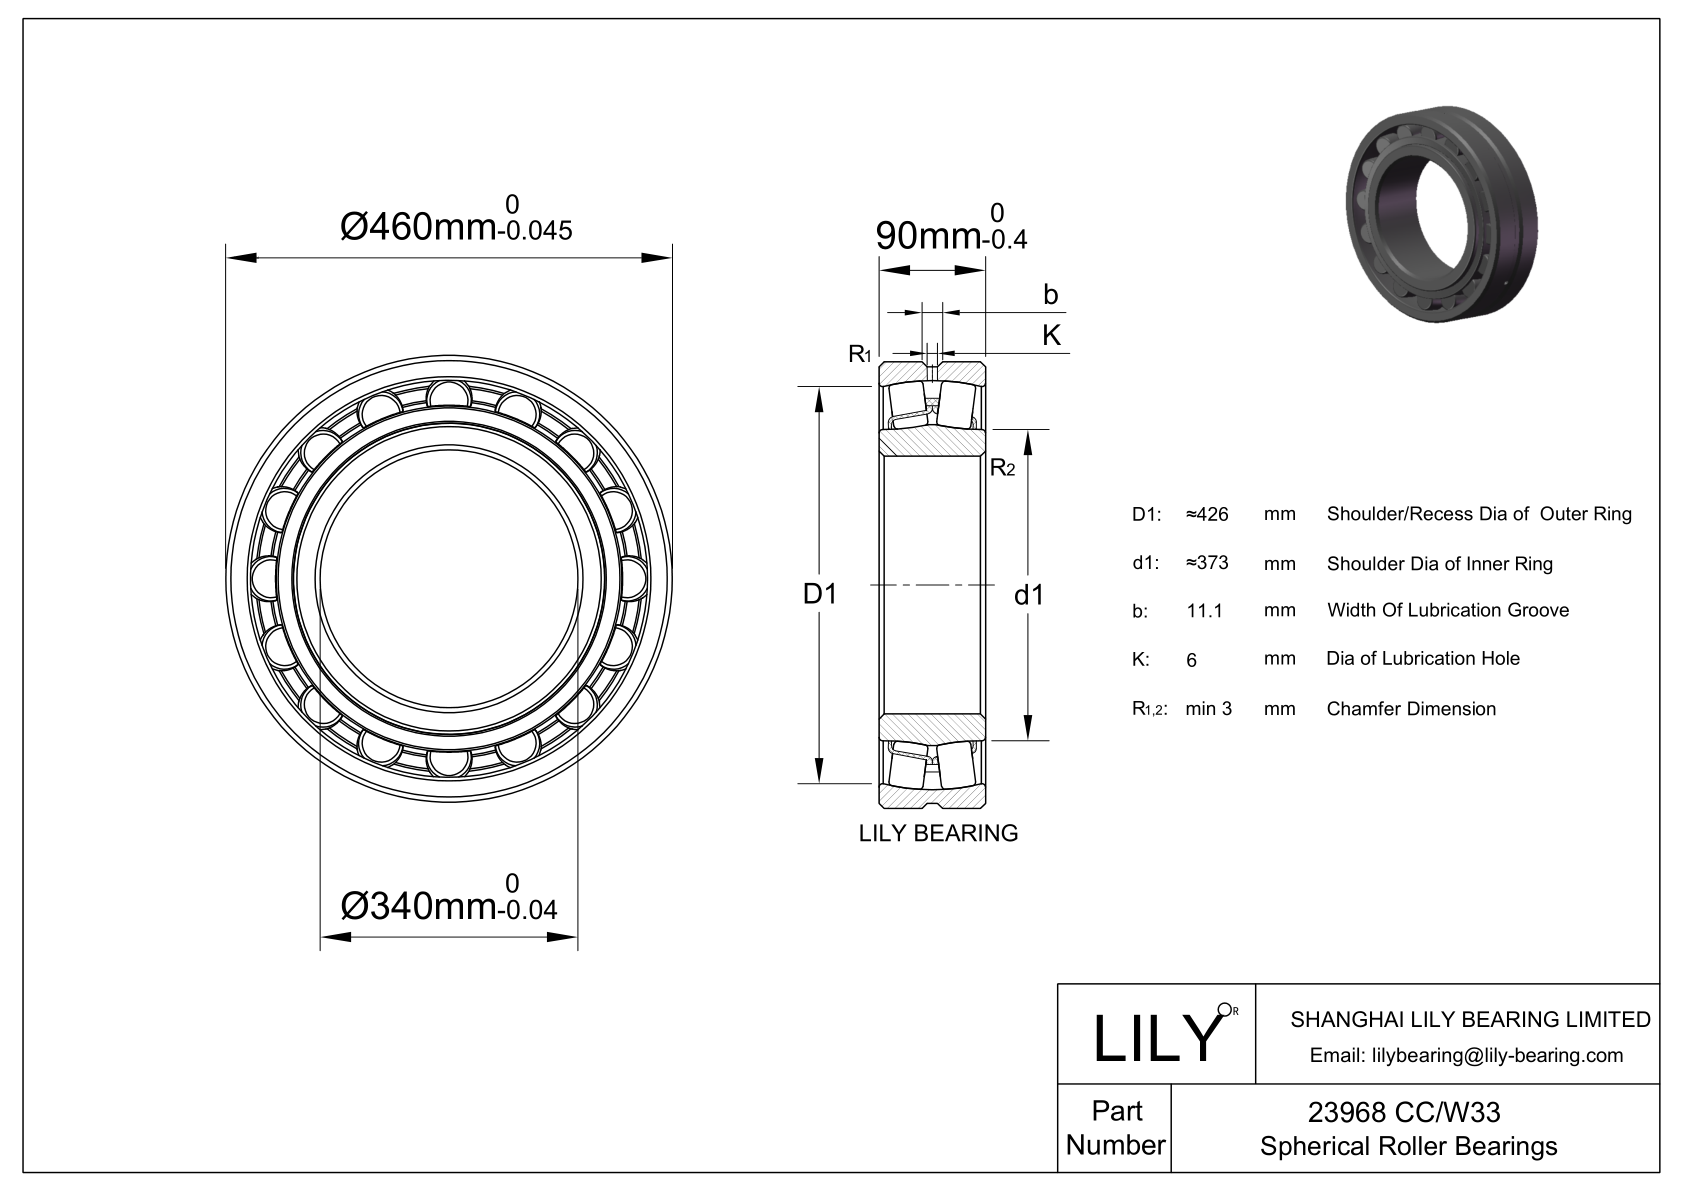 23968 CC/W33 Double Row Spherical Roller Bearing cad drawing